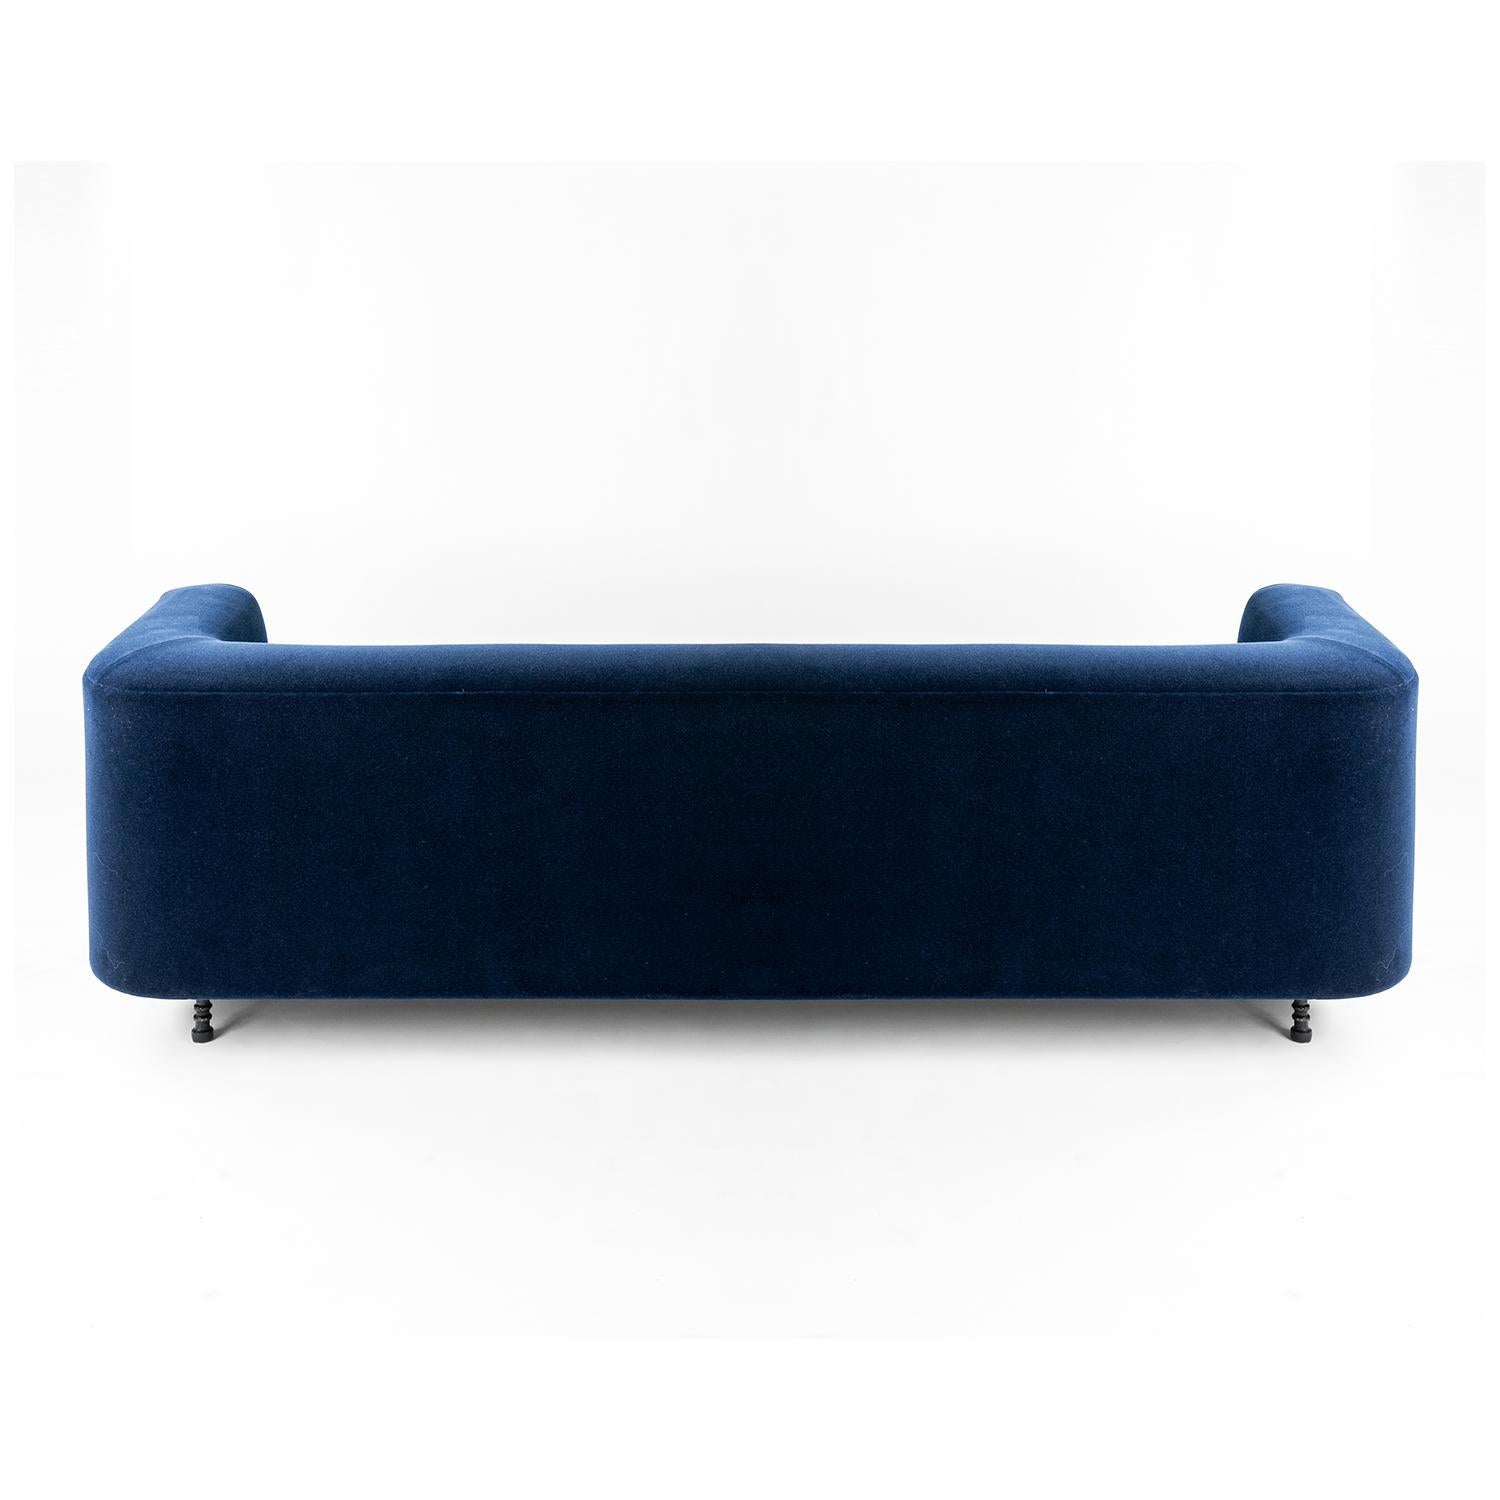 American Sofa Classical Modern Round Contemporary with Simple Hand Carved Steel Elements